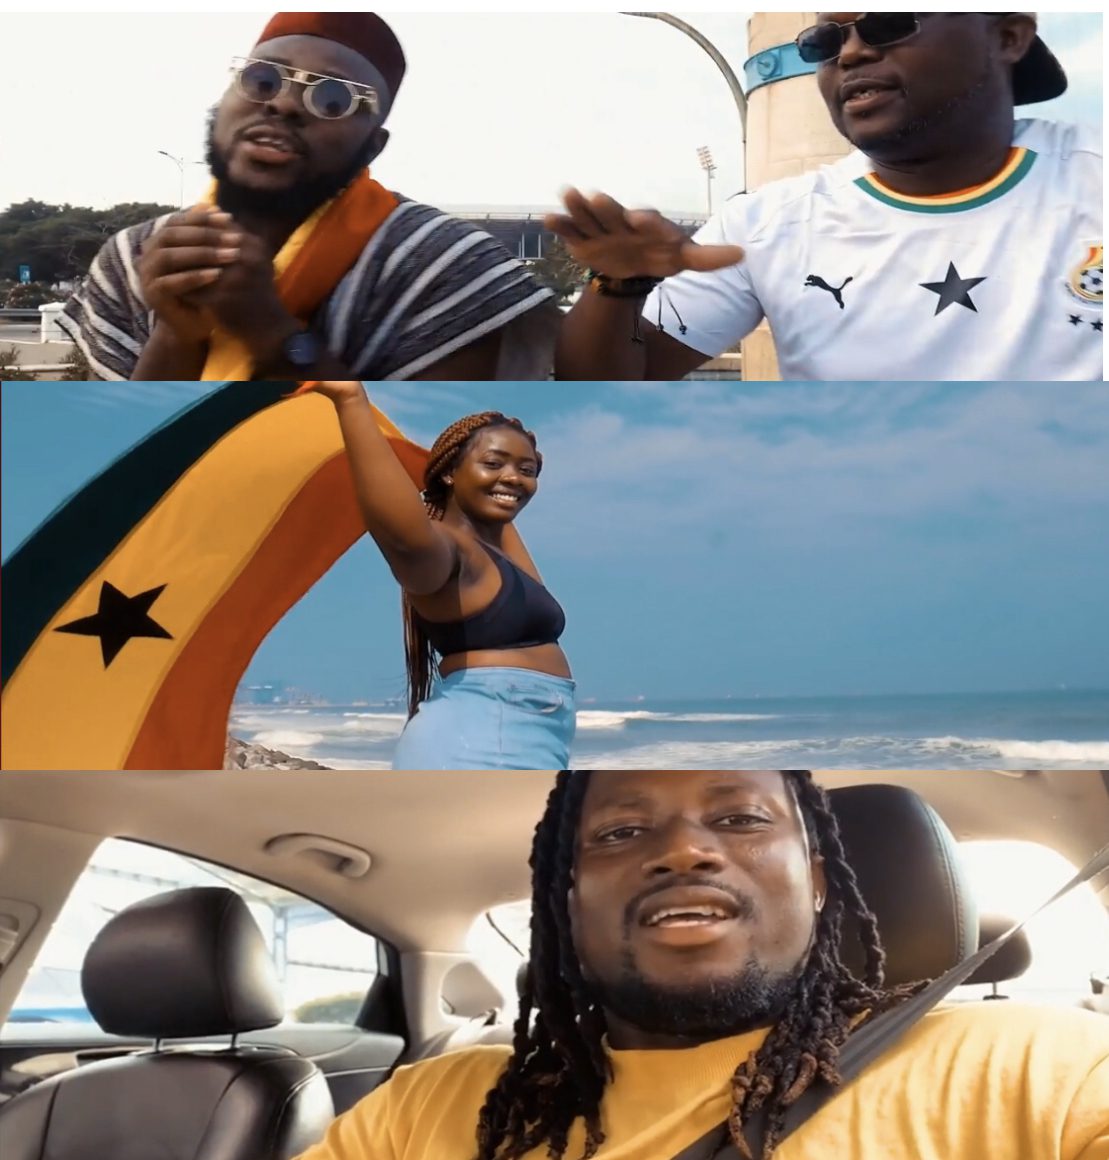 Kwasi Tay Drops New Song #Ghana To Celebrate 63rd Independence.